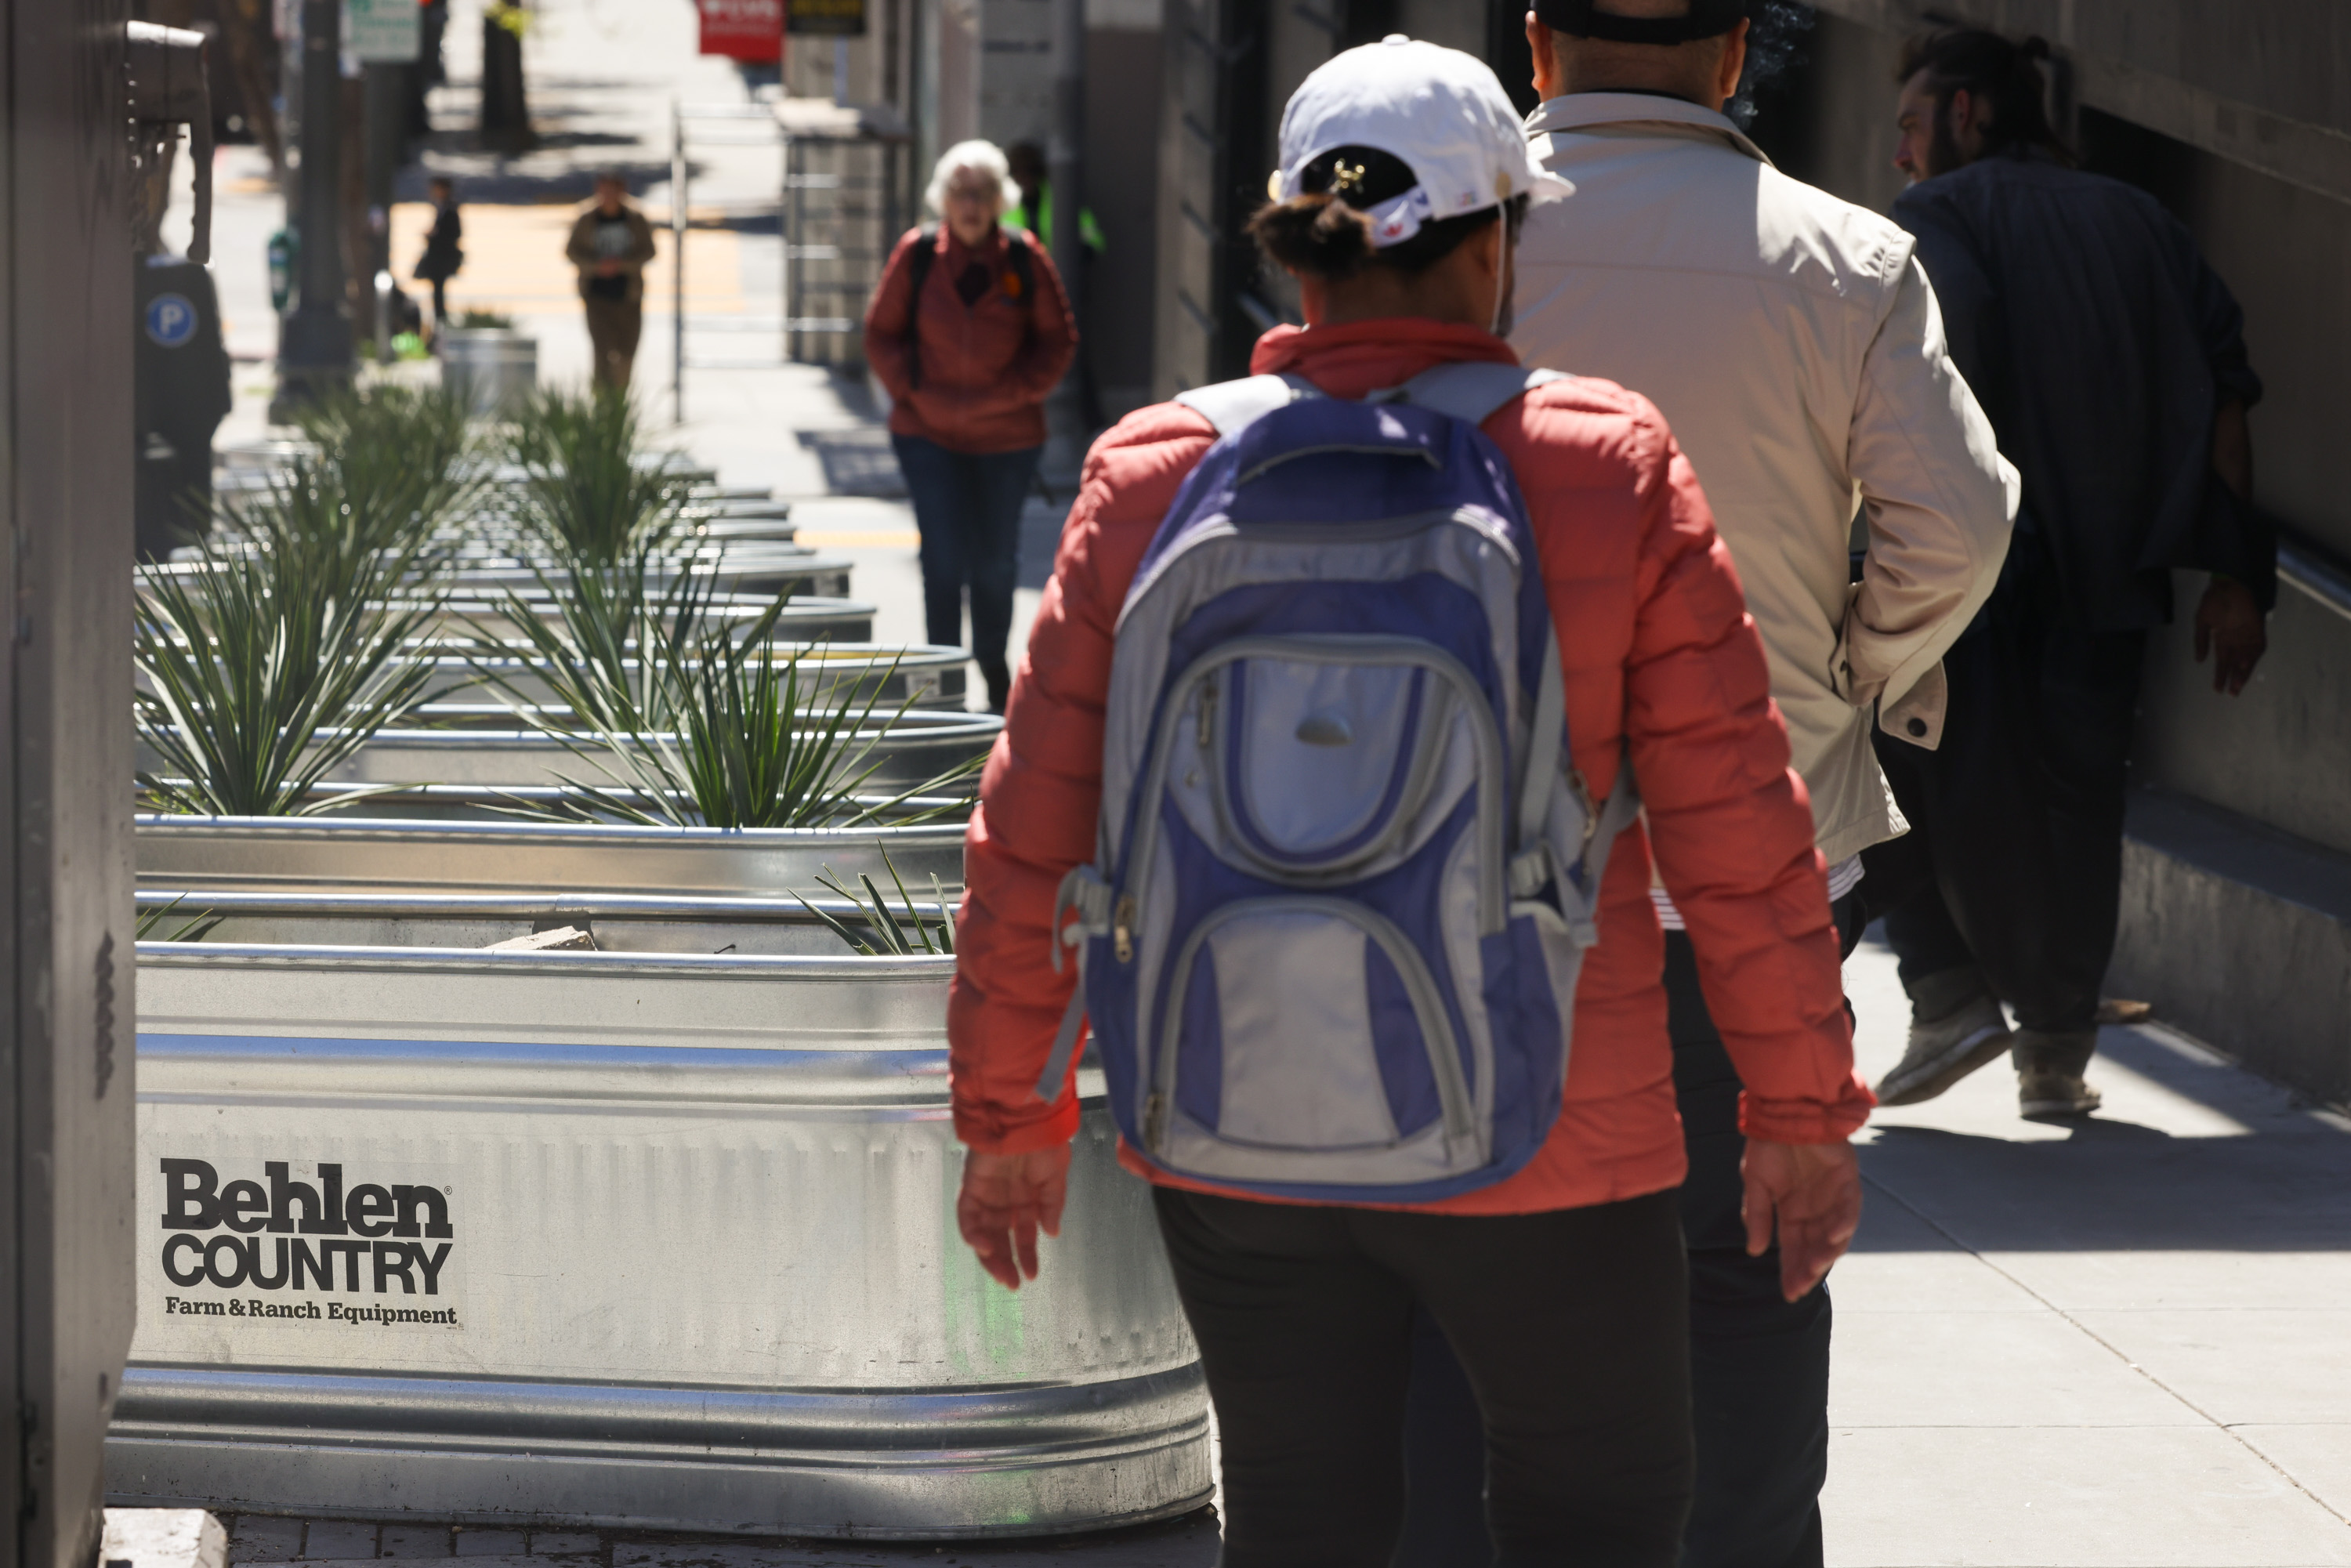 A person with a backpack walks by metallic planters on a sunny, urban sidewalk. Other pedestrians are visible in the background.